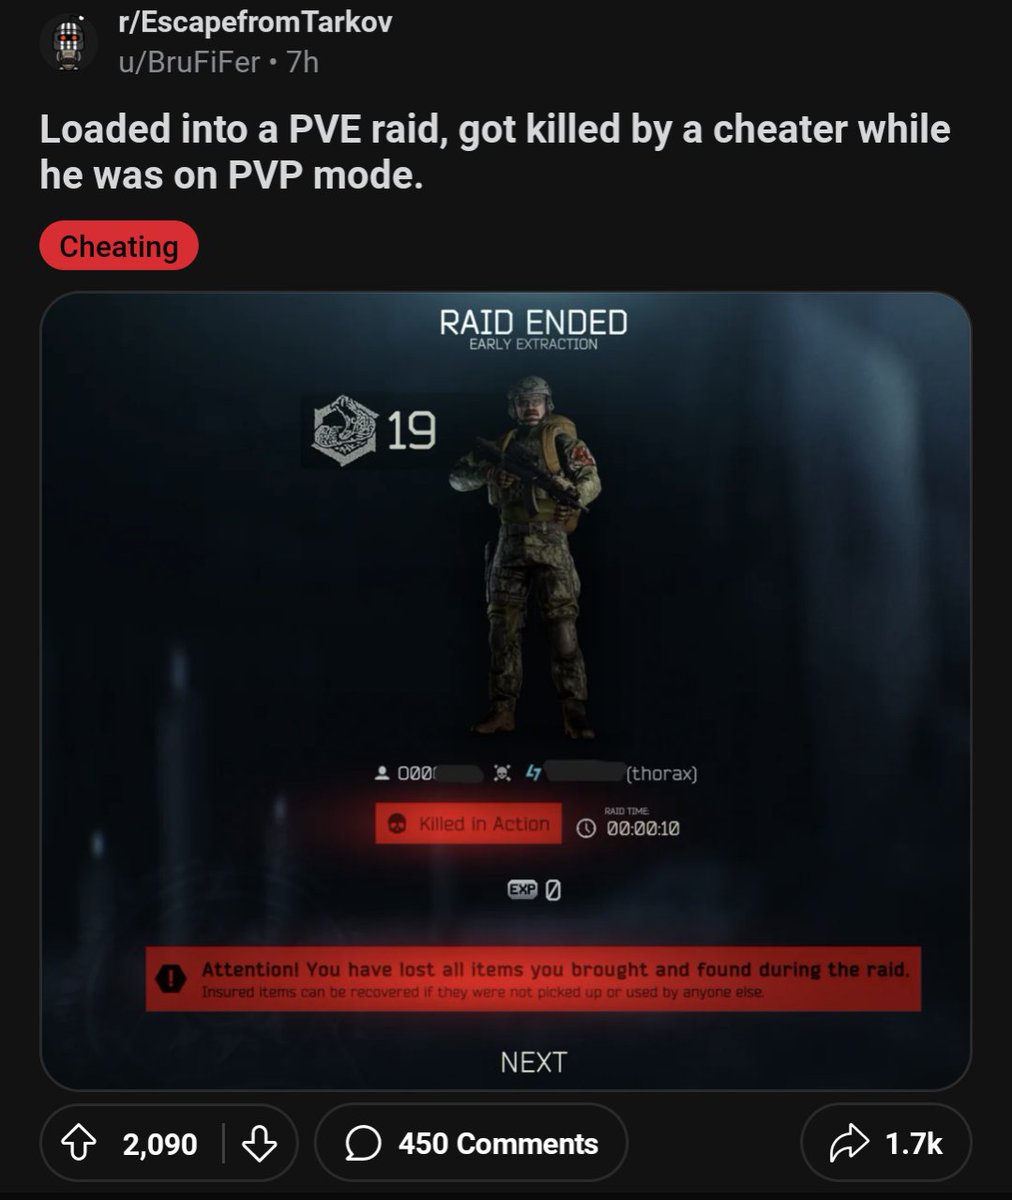 Apparently if you are in PVE mode, cheaters can hack into it as PVP mode and take your shit. Can't make this up...